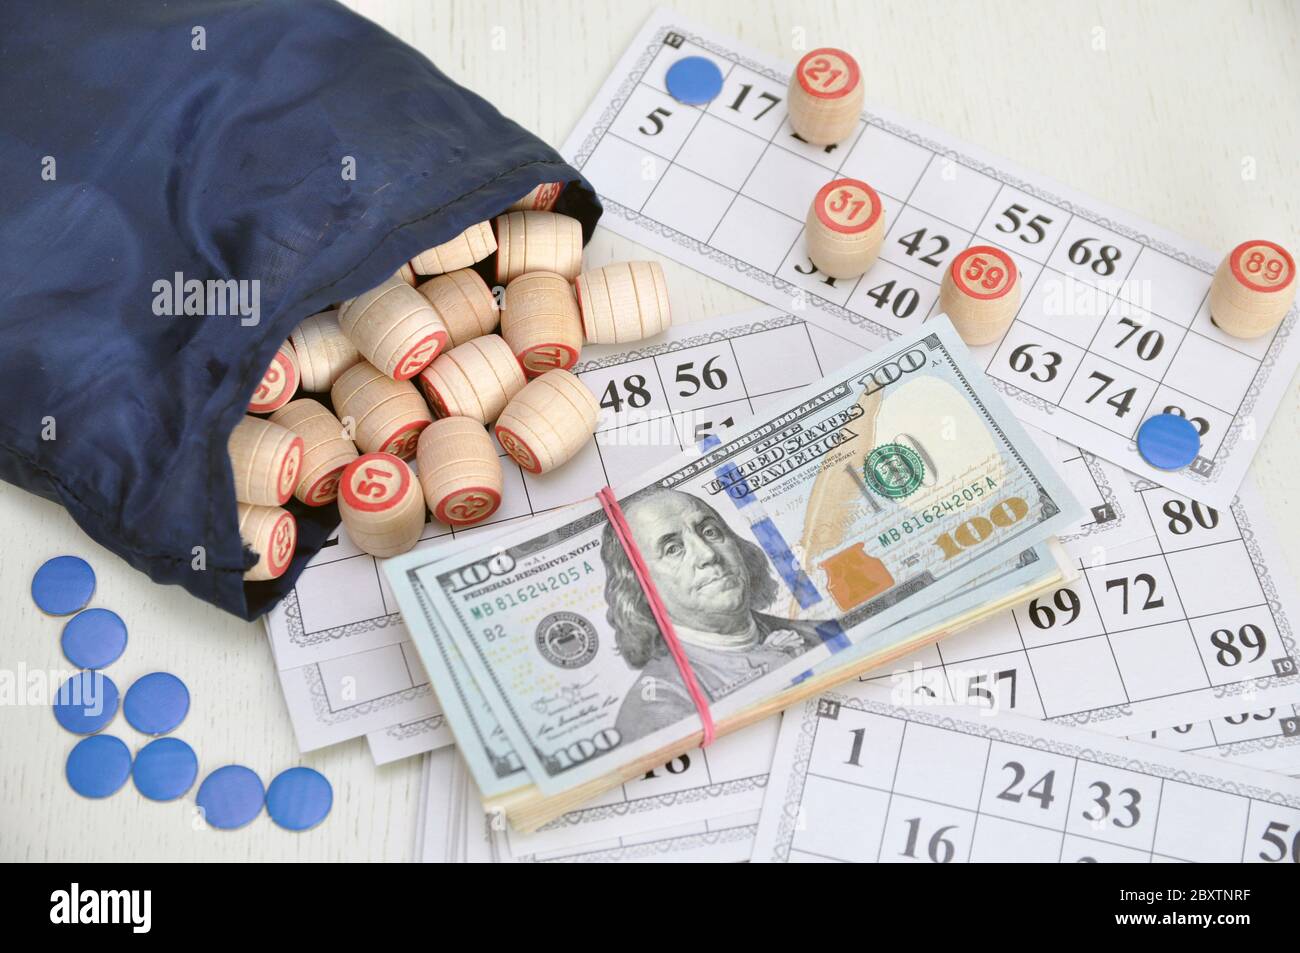 U.S. dollars. board game lotto. Wooden barrels on paper cards, a game for money. Excitement. Stock Photo